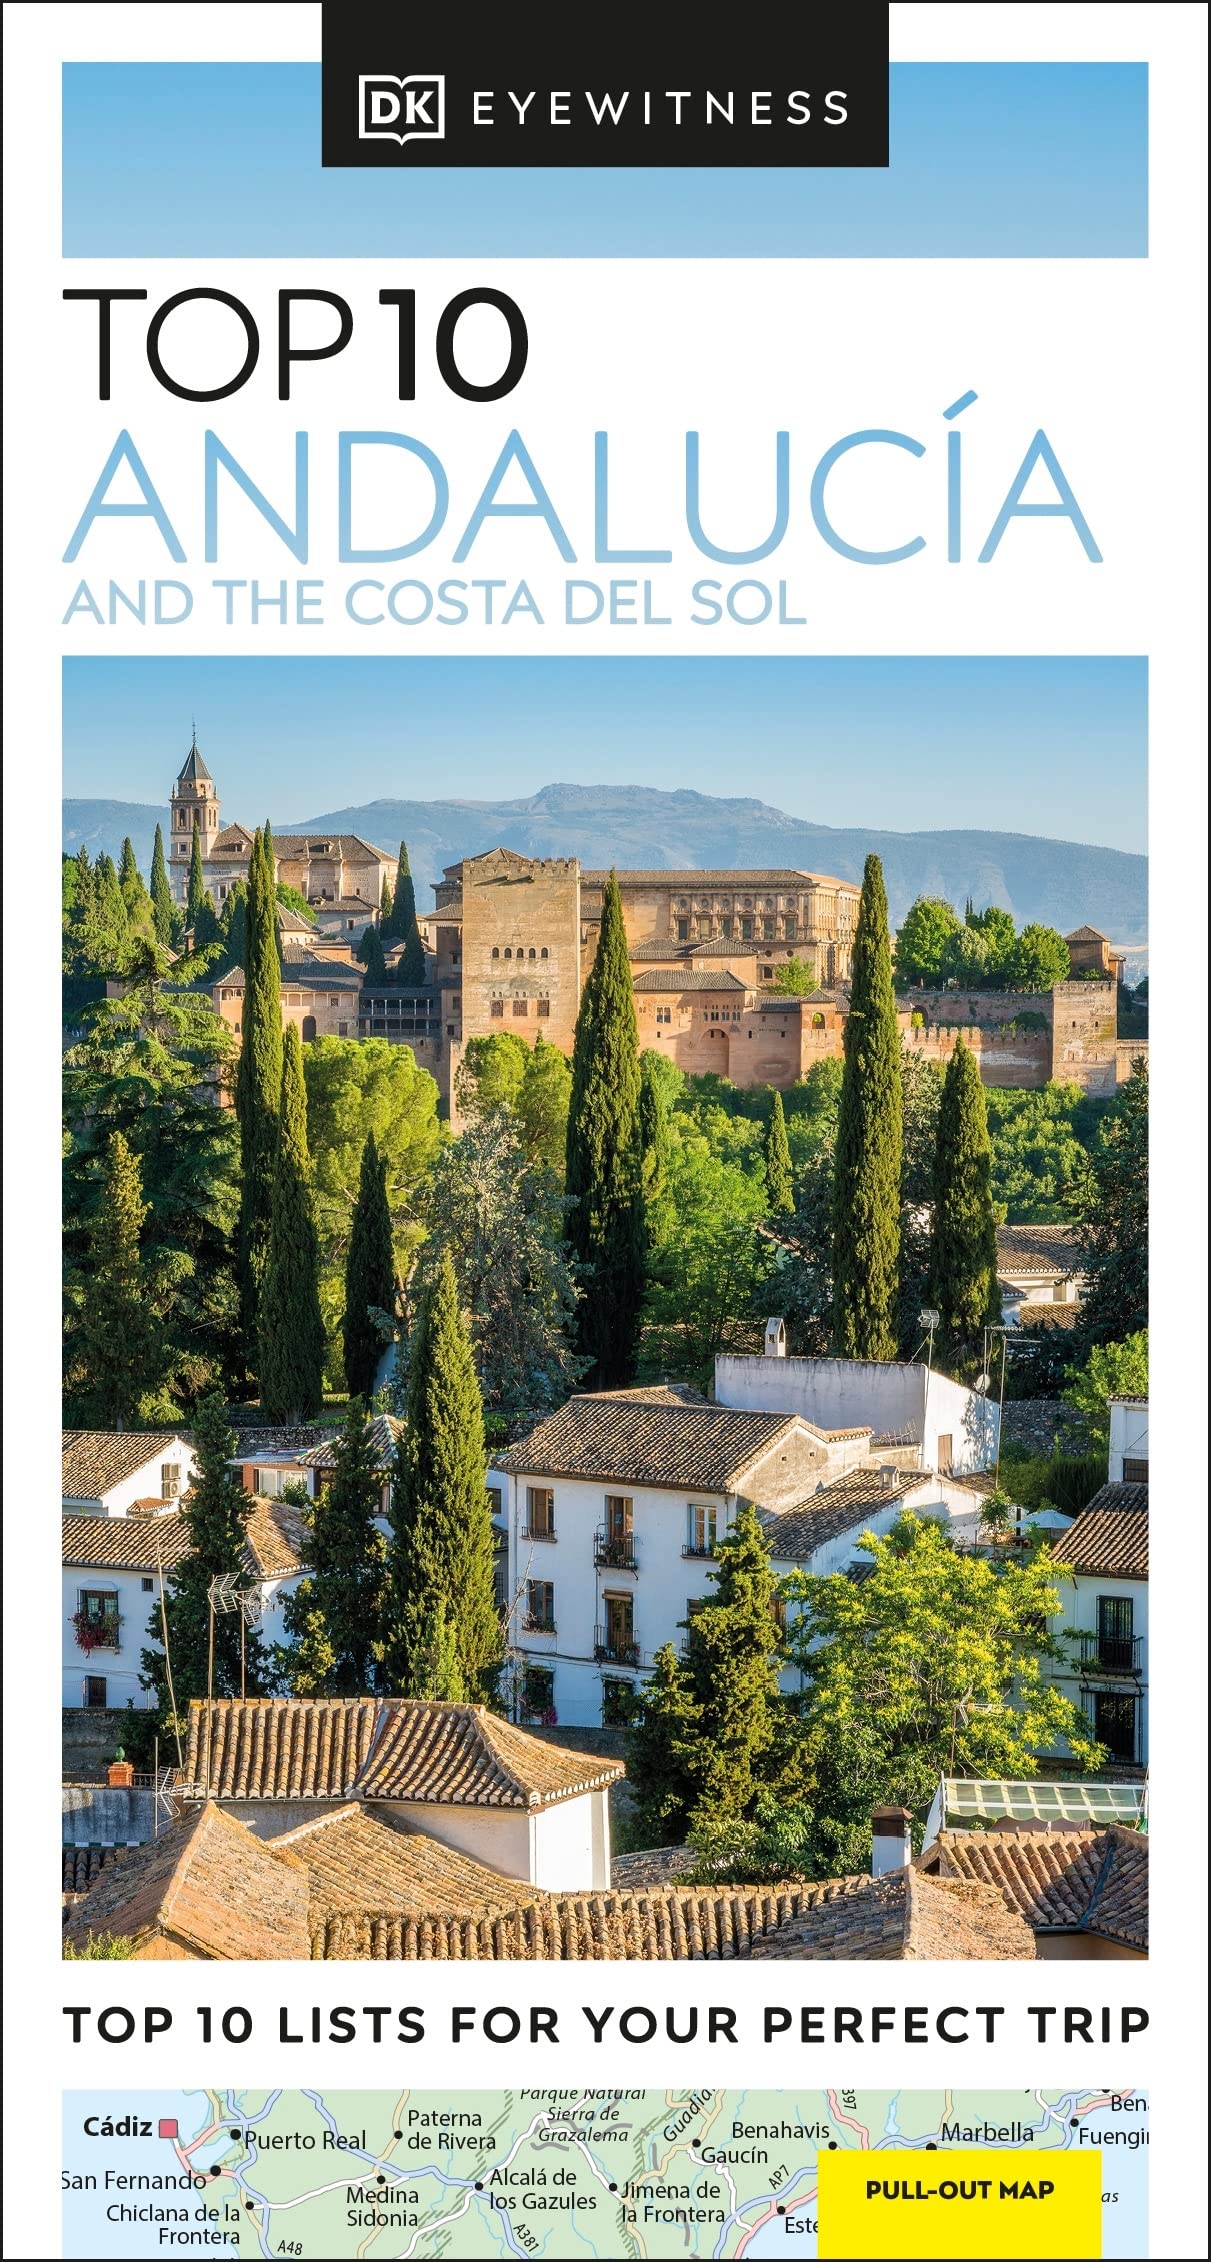 Andalucía and the Costa del Sol